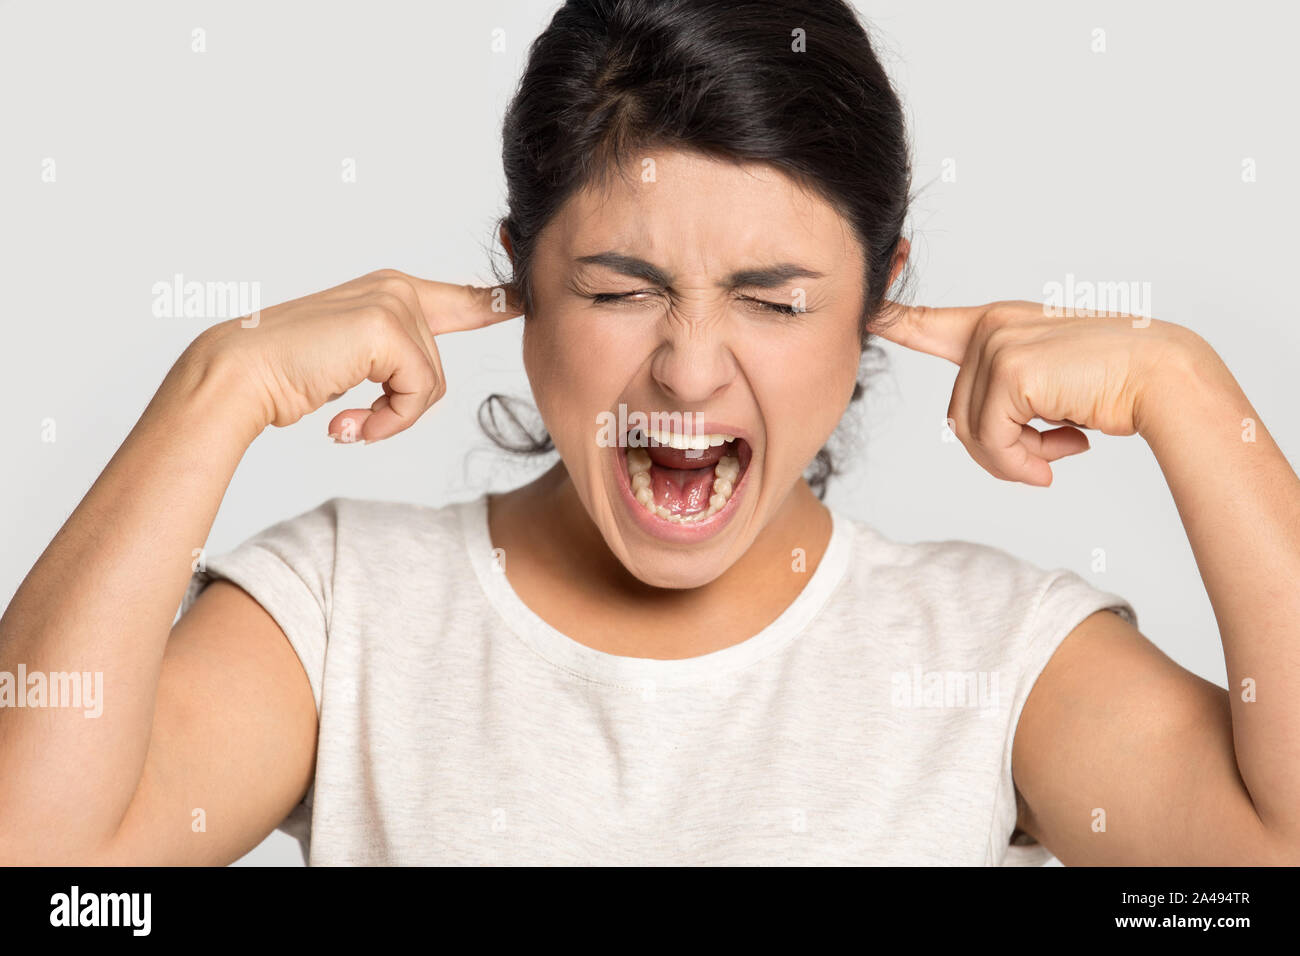 Mad ethnic girl scream bothered by disturbing sound Stock Photo